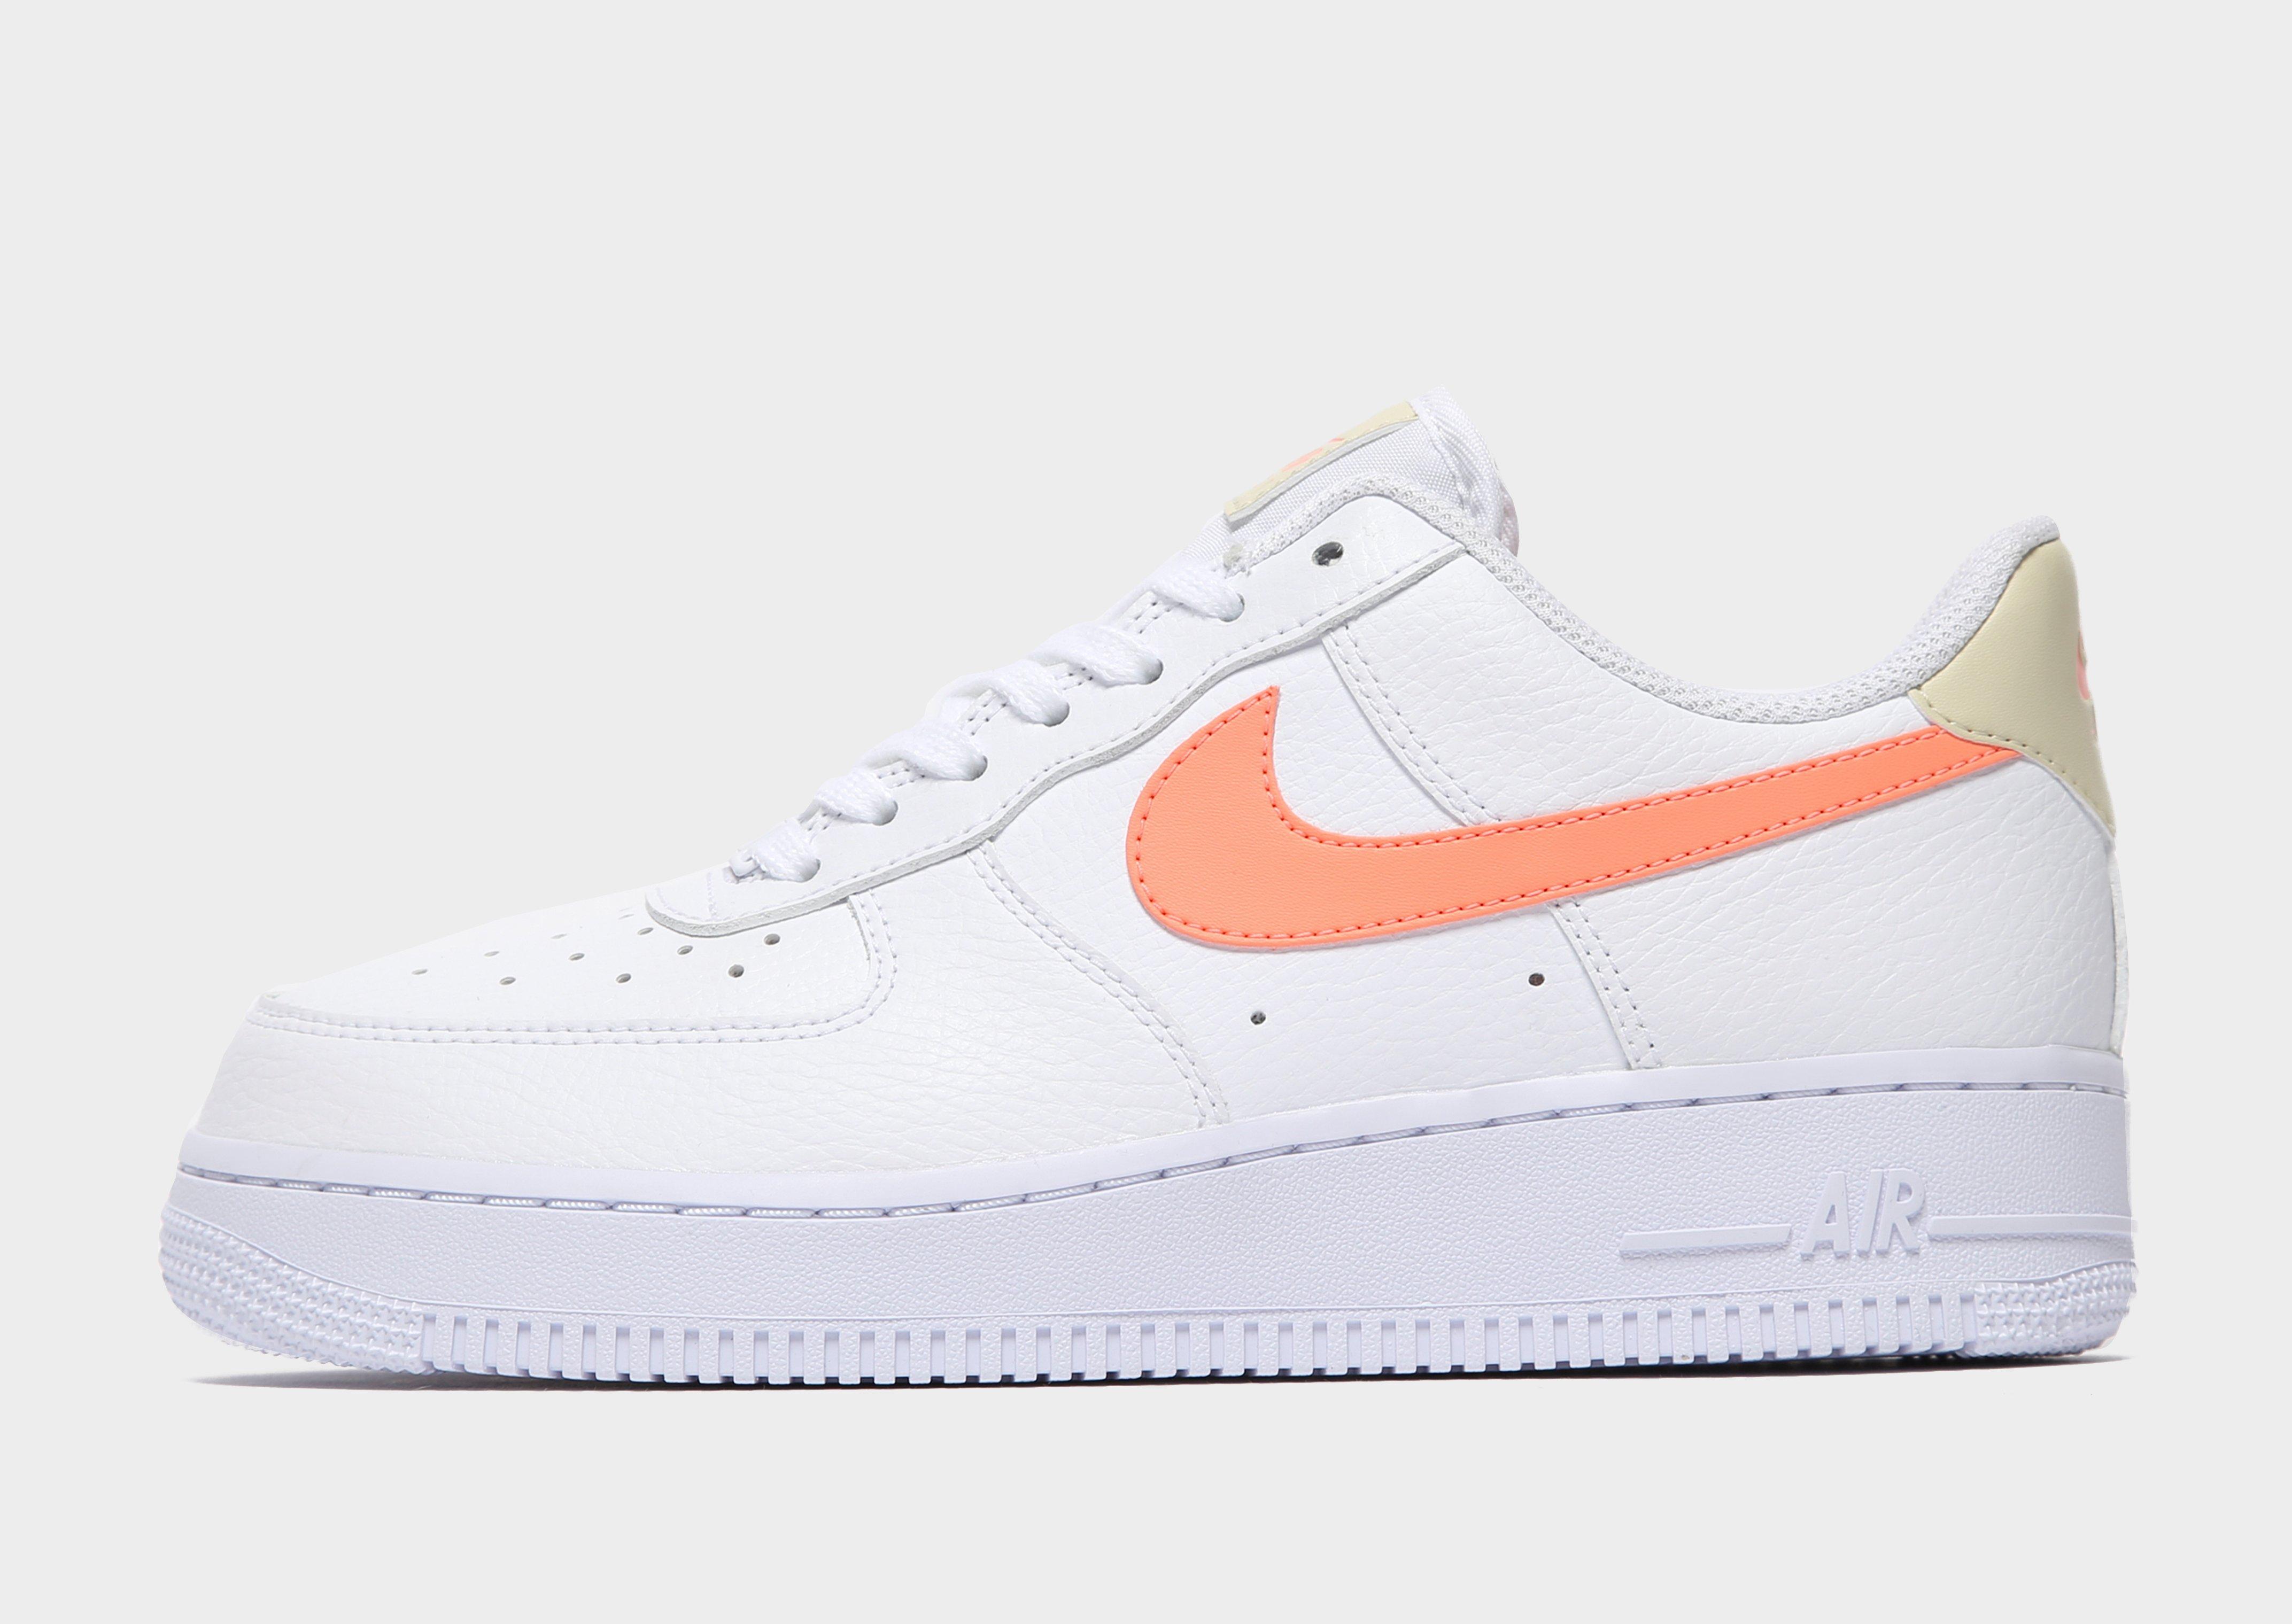 Acquista Nike Air Force 1 '07 LV8 Donna in Bianco